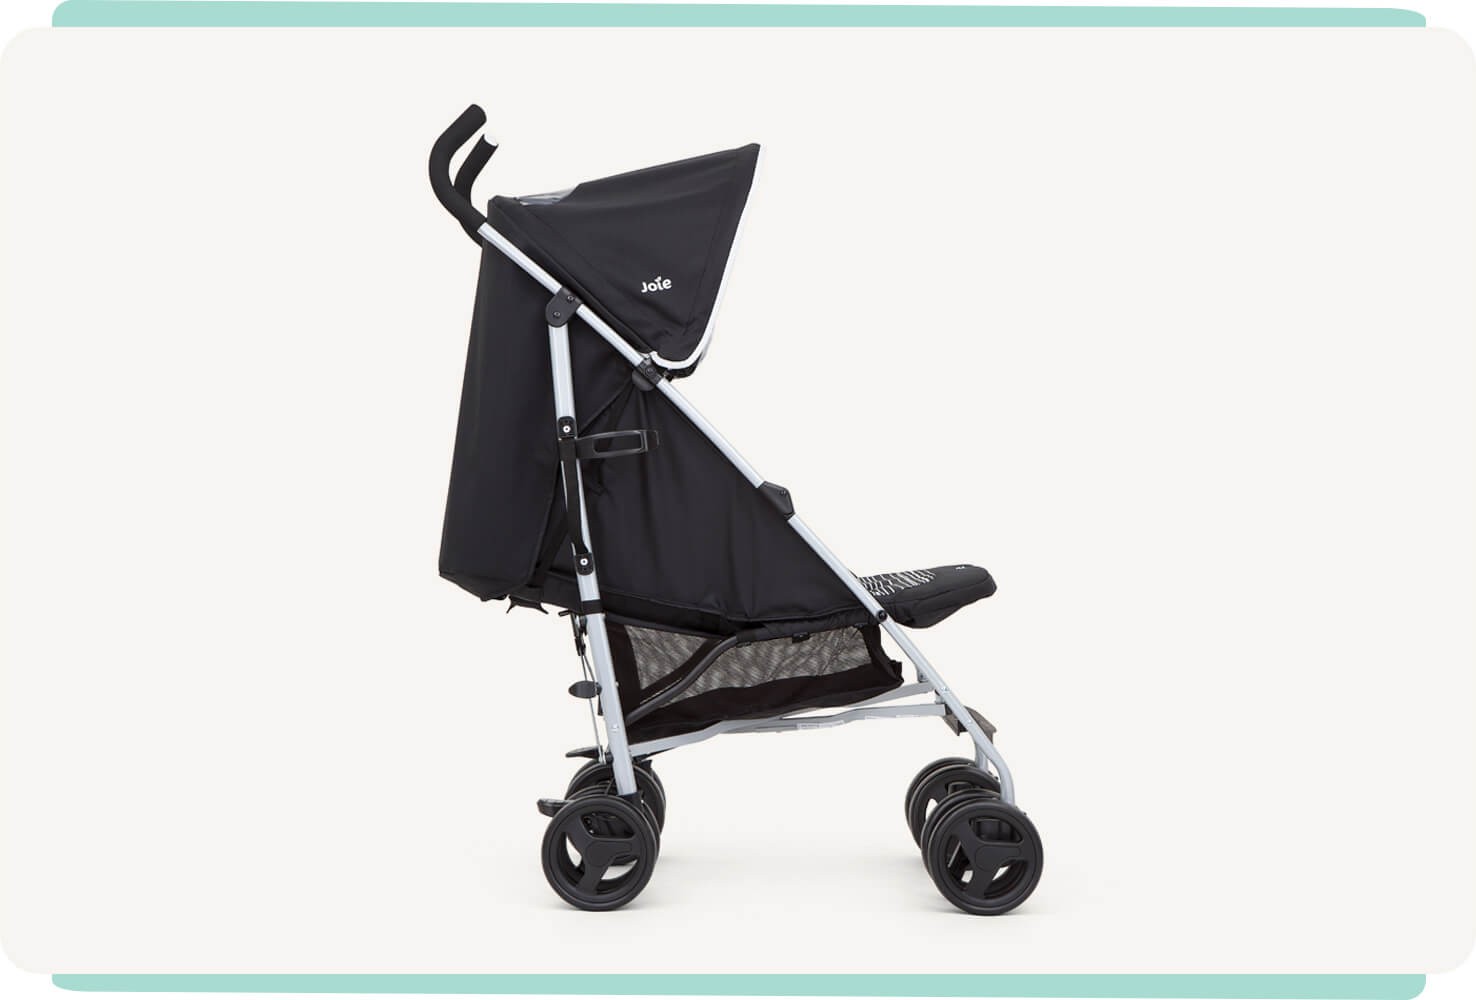   Side profile of Joie black and white nitro stroller.